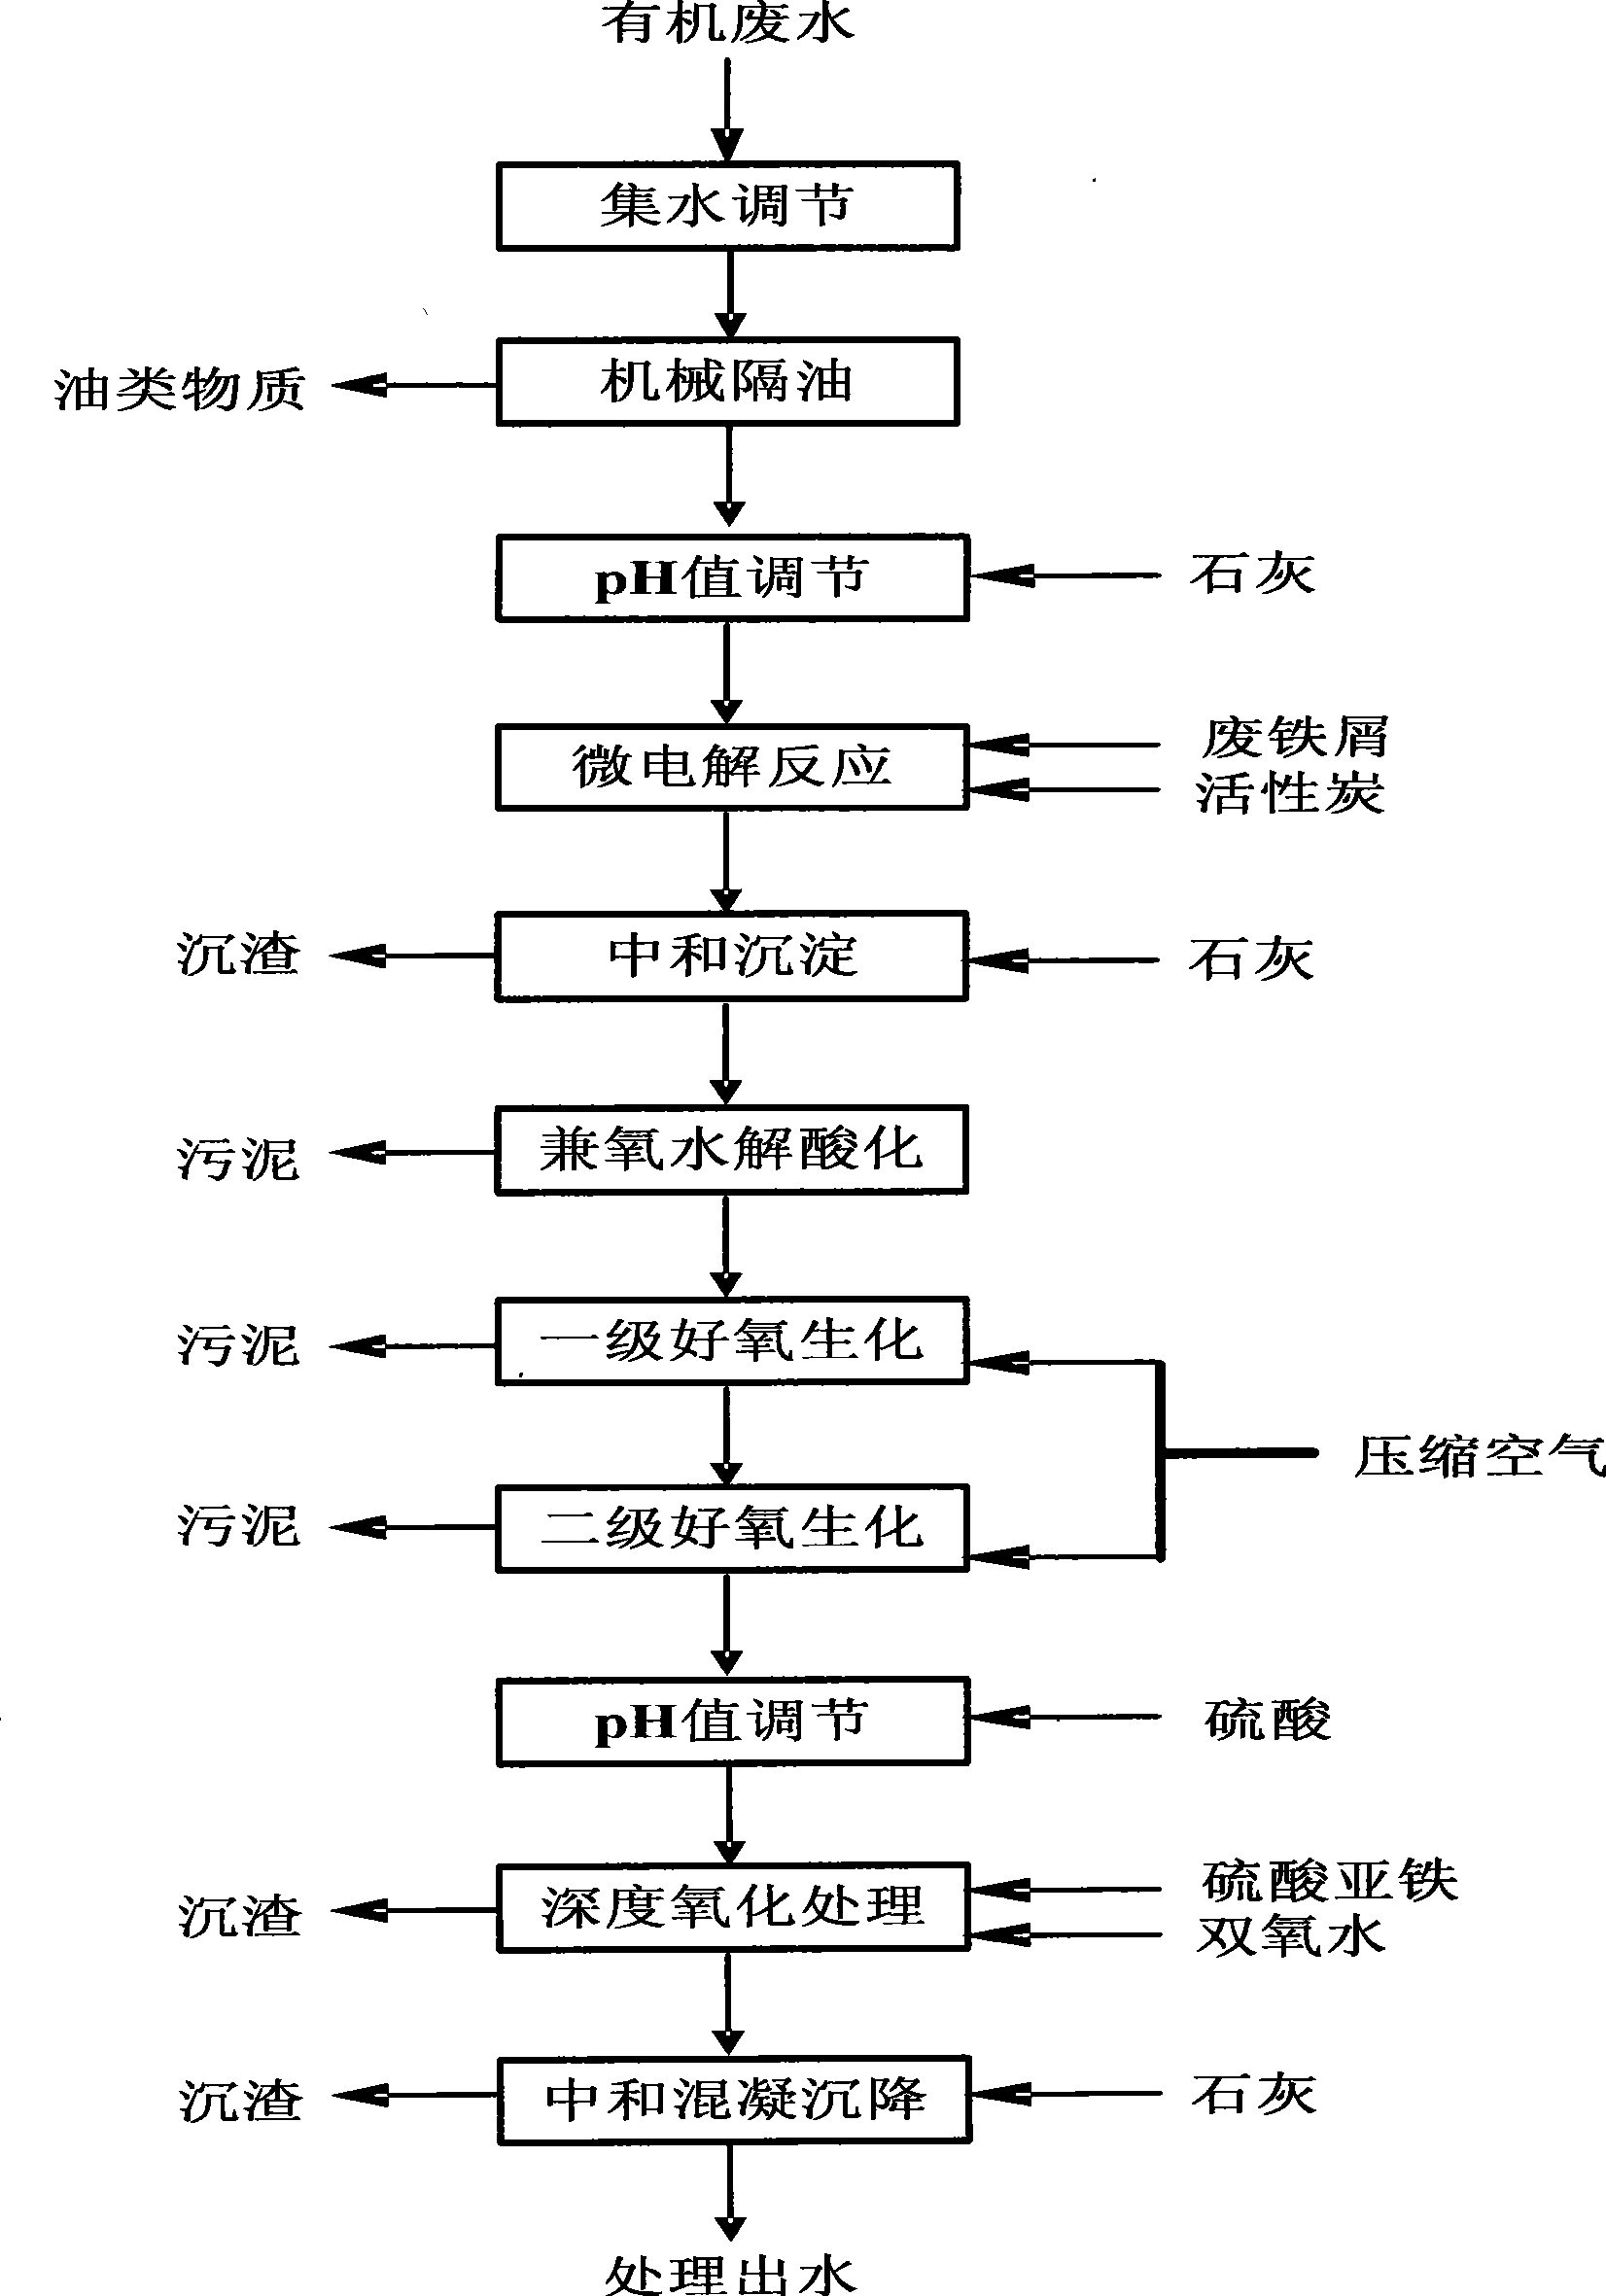 Process for processing high concentration refractory organic wastewater containing paratoluidine